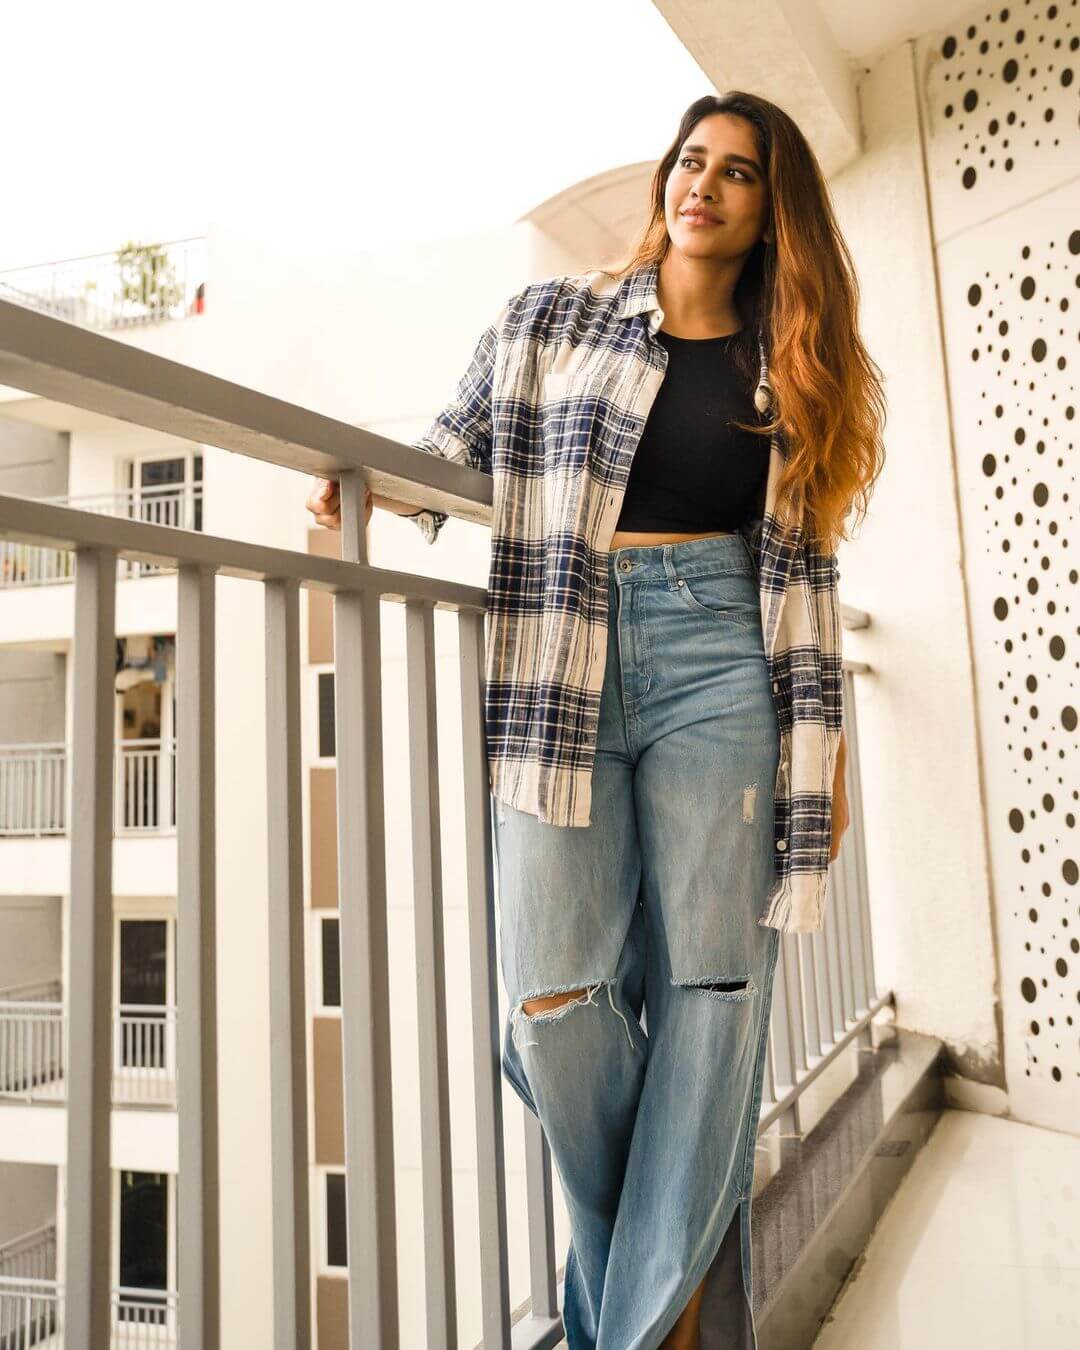 Nabha Natesh Gives Us Major Casual Outfit Look Inspo In Damage Denim Jeans And Black Top with Open Shirt